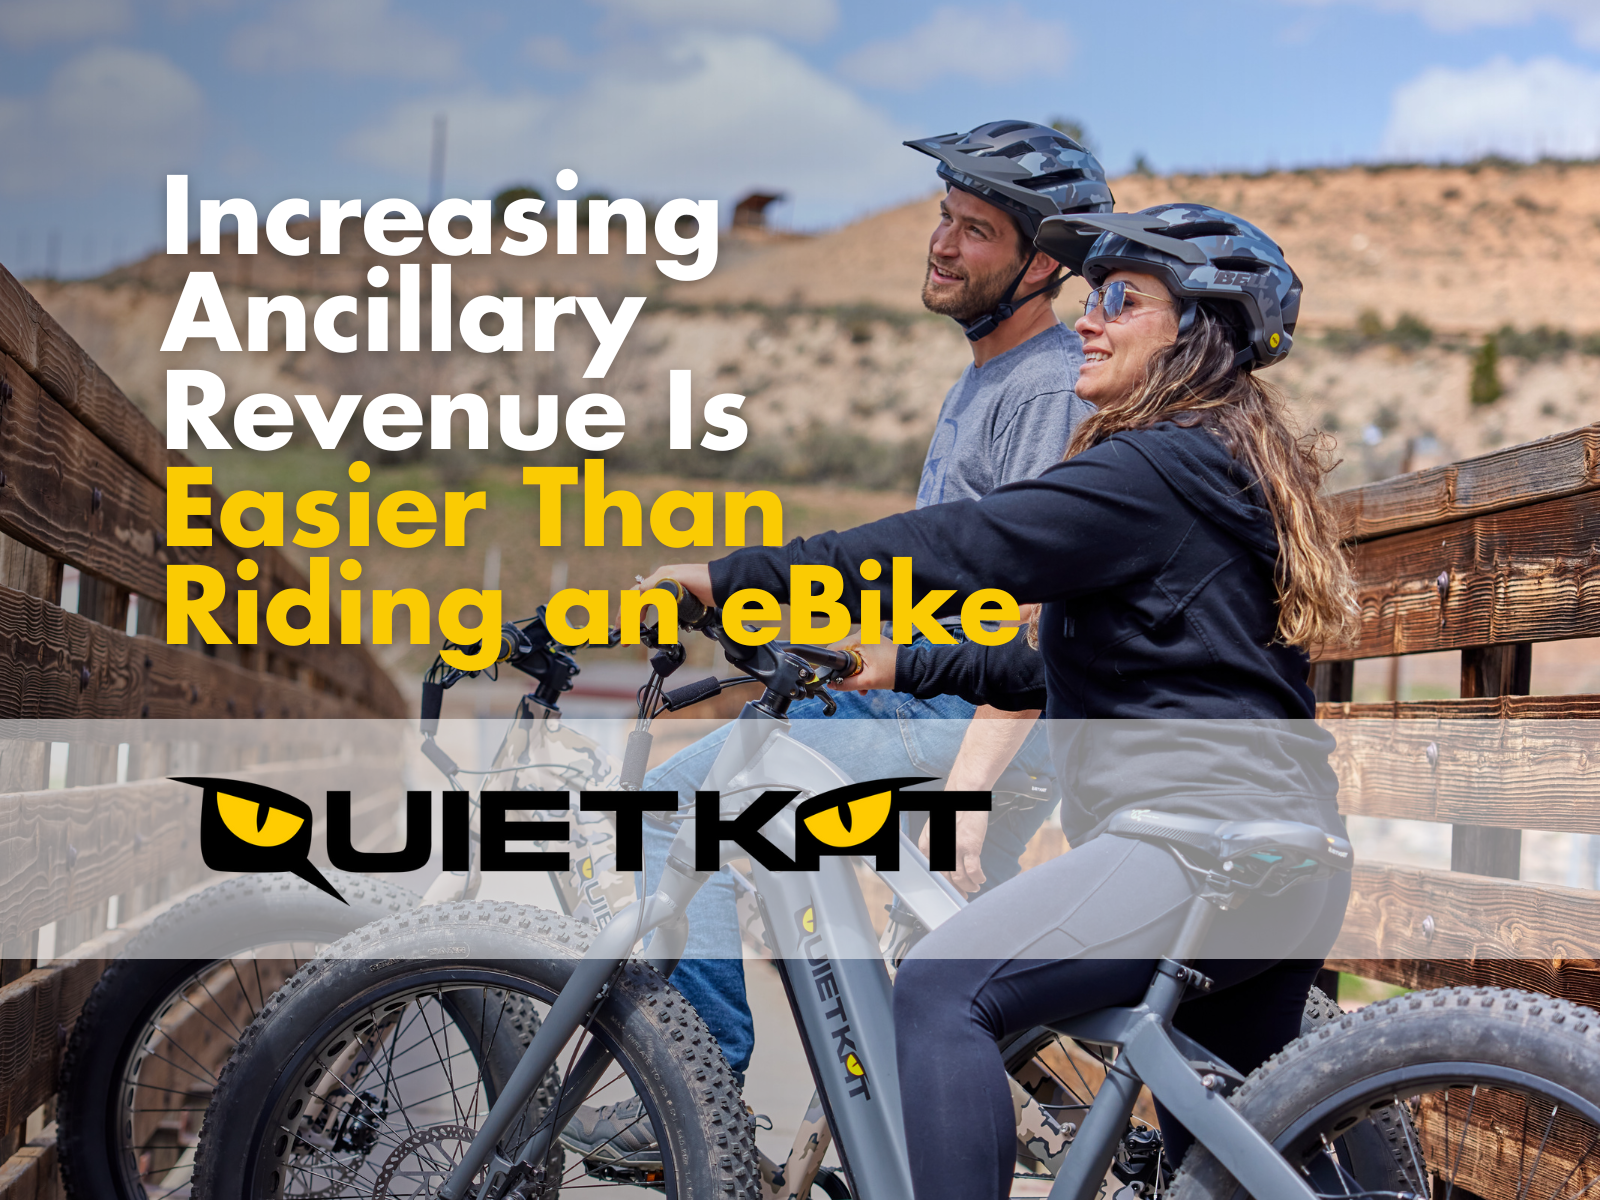 Increasing Ancillary Revenue Is Easier Than Riding an eBike